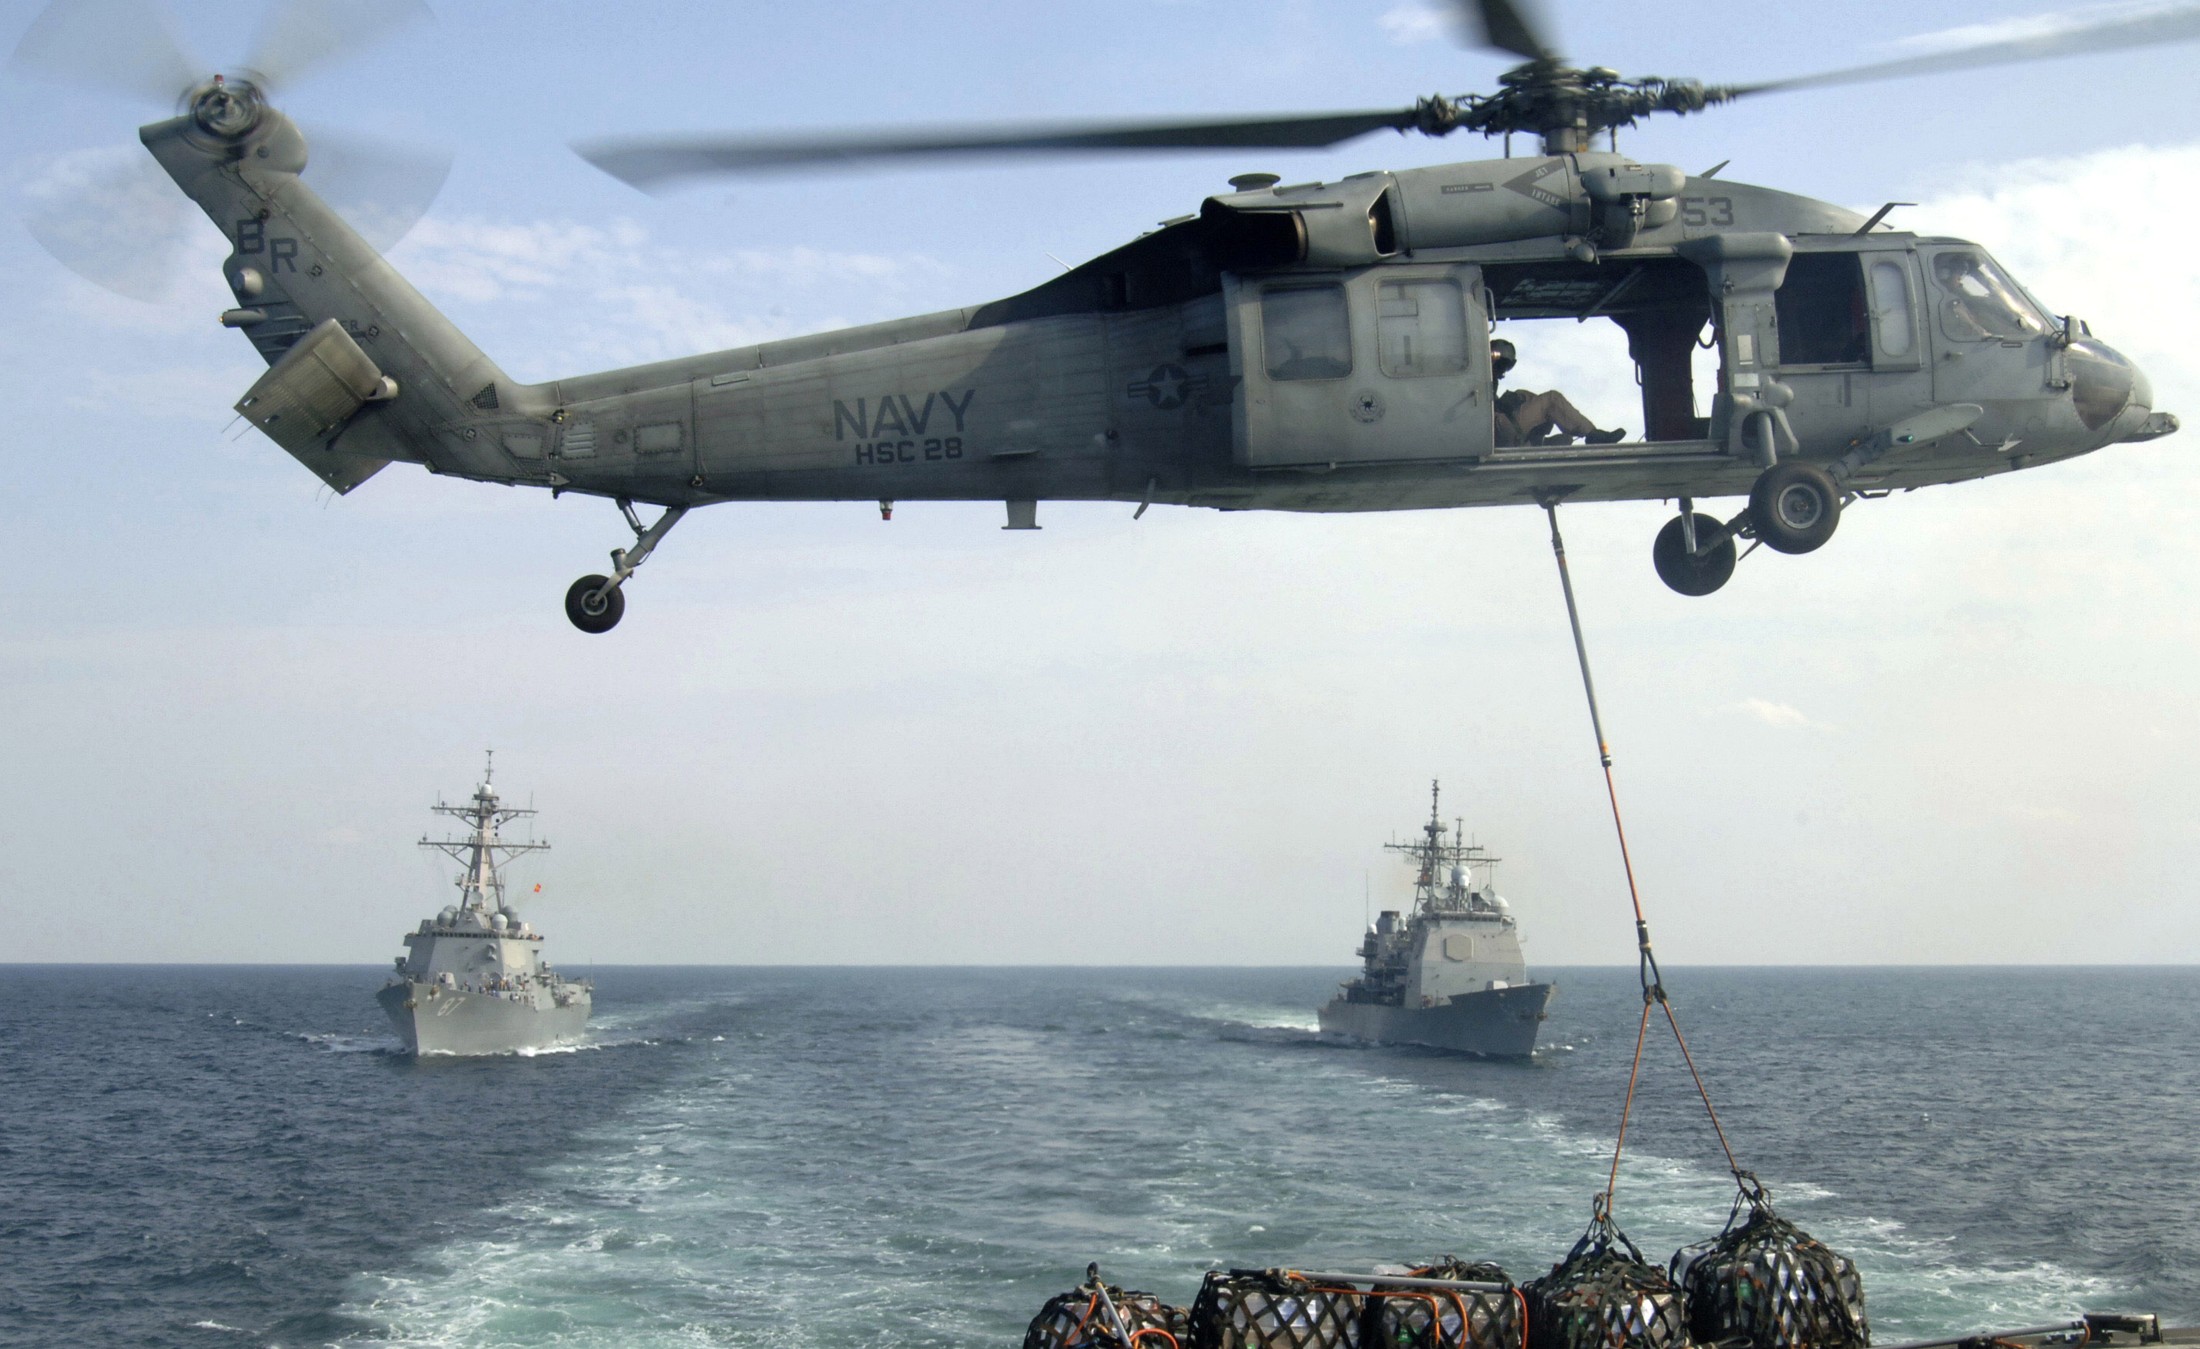 hsc-28 dragon whales helicopter sea combat squadron mh-60s seahawk us navy 142 arabian sea